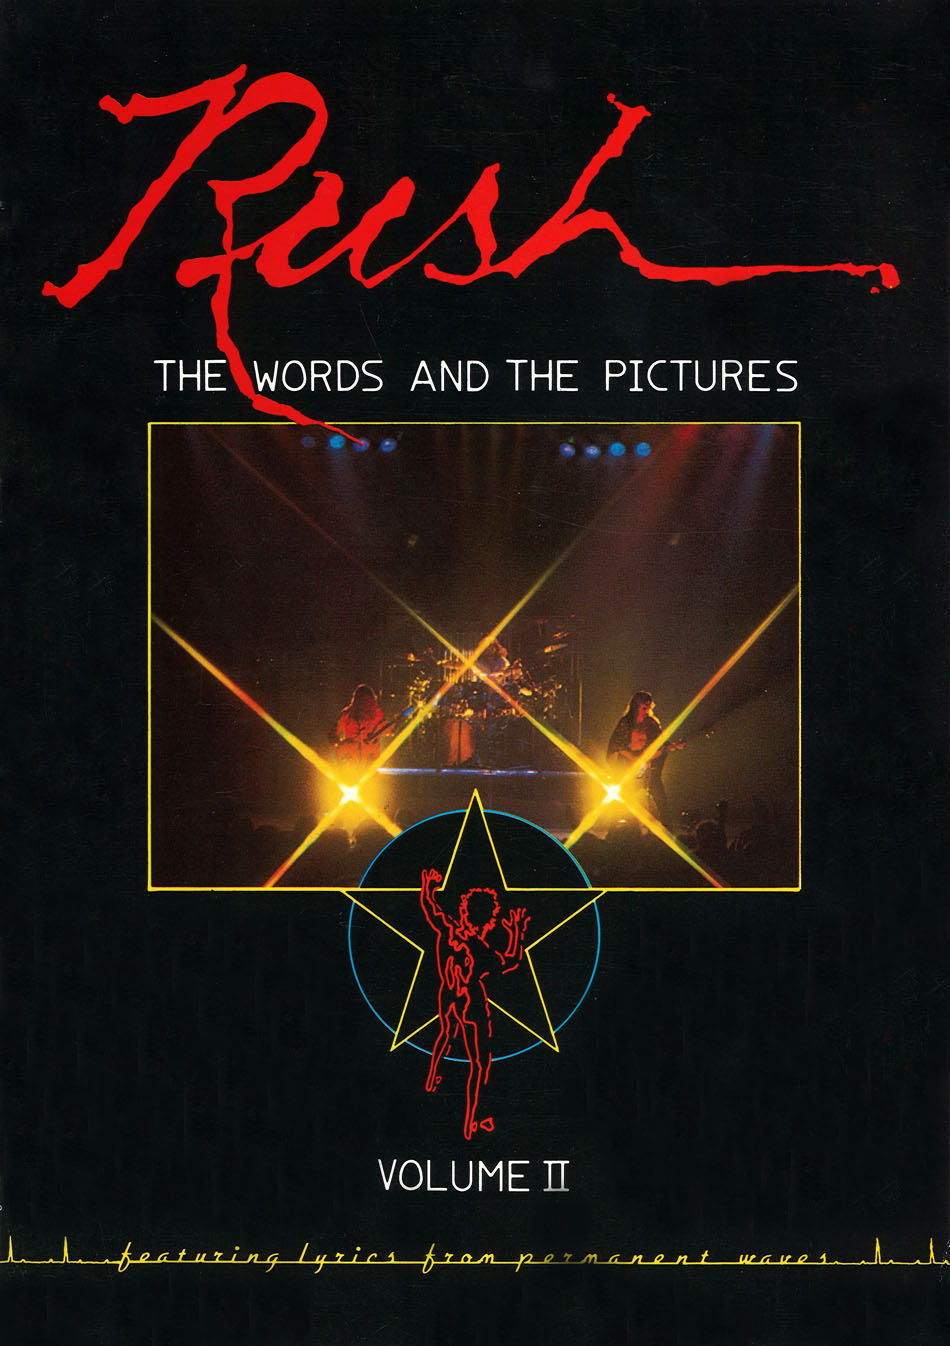 Rush The Words and the Pictures Volume II